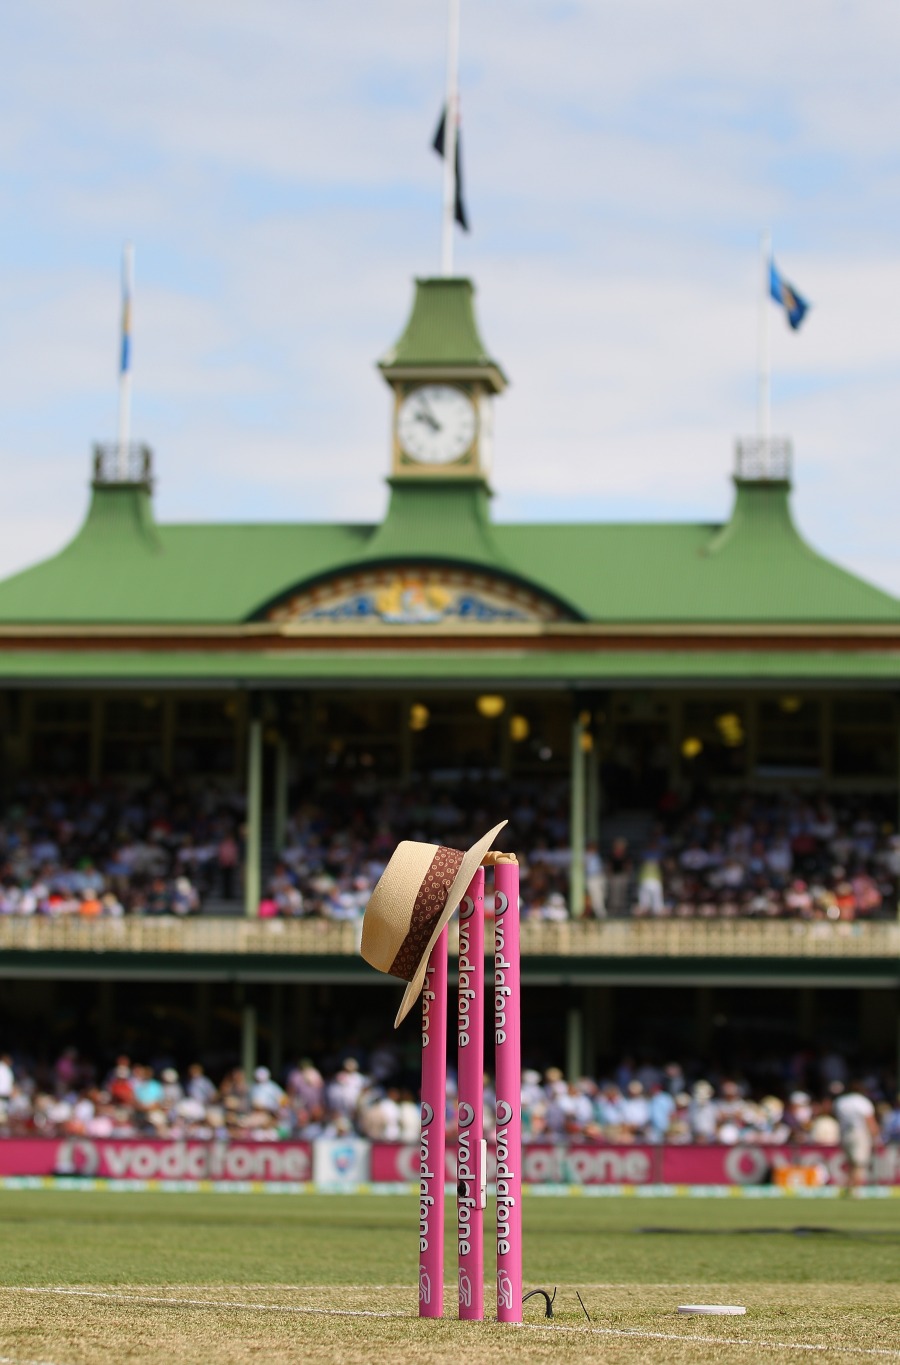 Tony Greig's hat sits on the stumps at the SCG